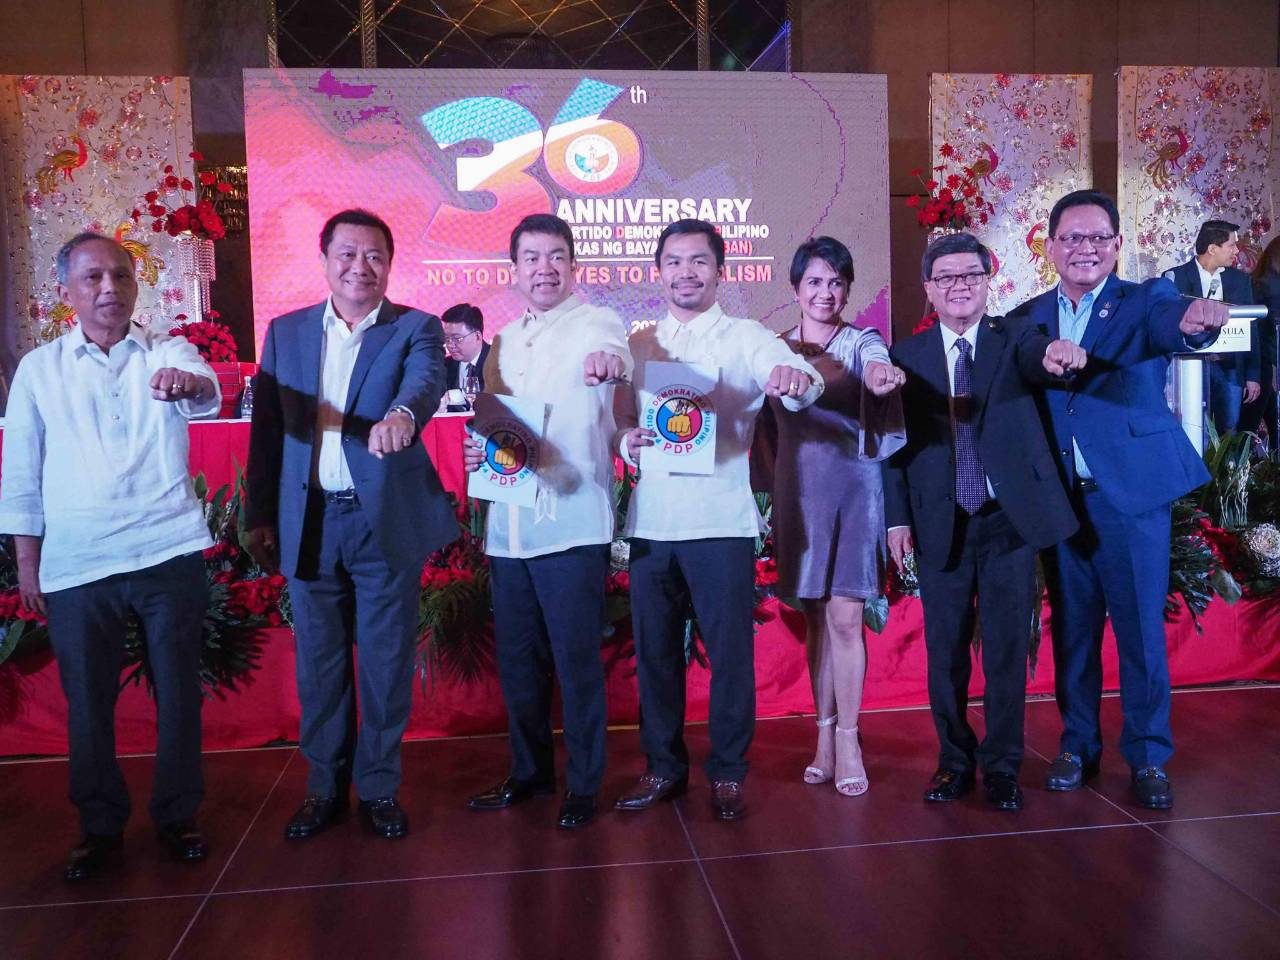 RULING PARTY. PDP vice chair Alfonso Cusi, PDP Sec. Gen. Pantaleon Alvarez, PDP Pres. Koko Pimentel, Sen. Manny Pacquiao, Usec. Astravel Naik, Justice Sec. Vitaliano Aguirre II and Atty. Raul Lambino flash the PDP fist sign after swearing in of Pacquiao as PDP regional president for Region 12. Photo courtesy of House of Representatives Media Bureau
 